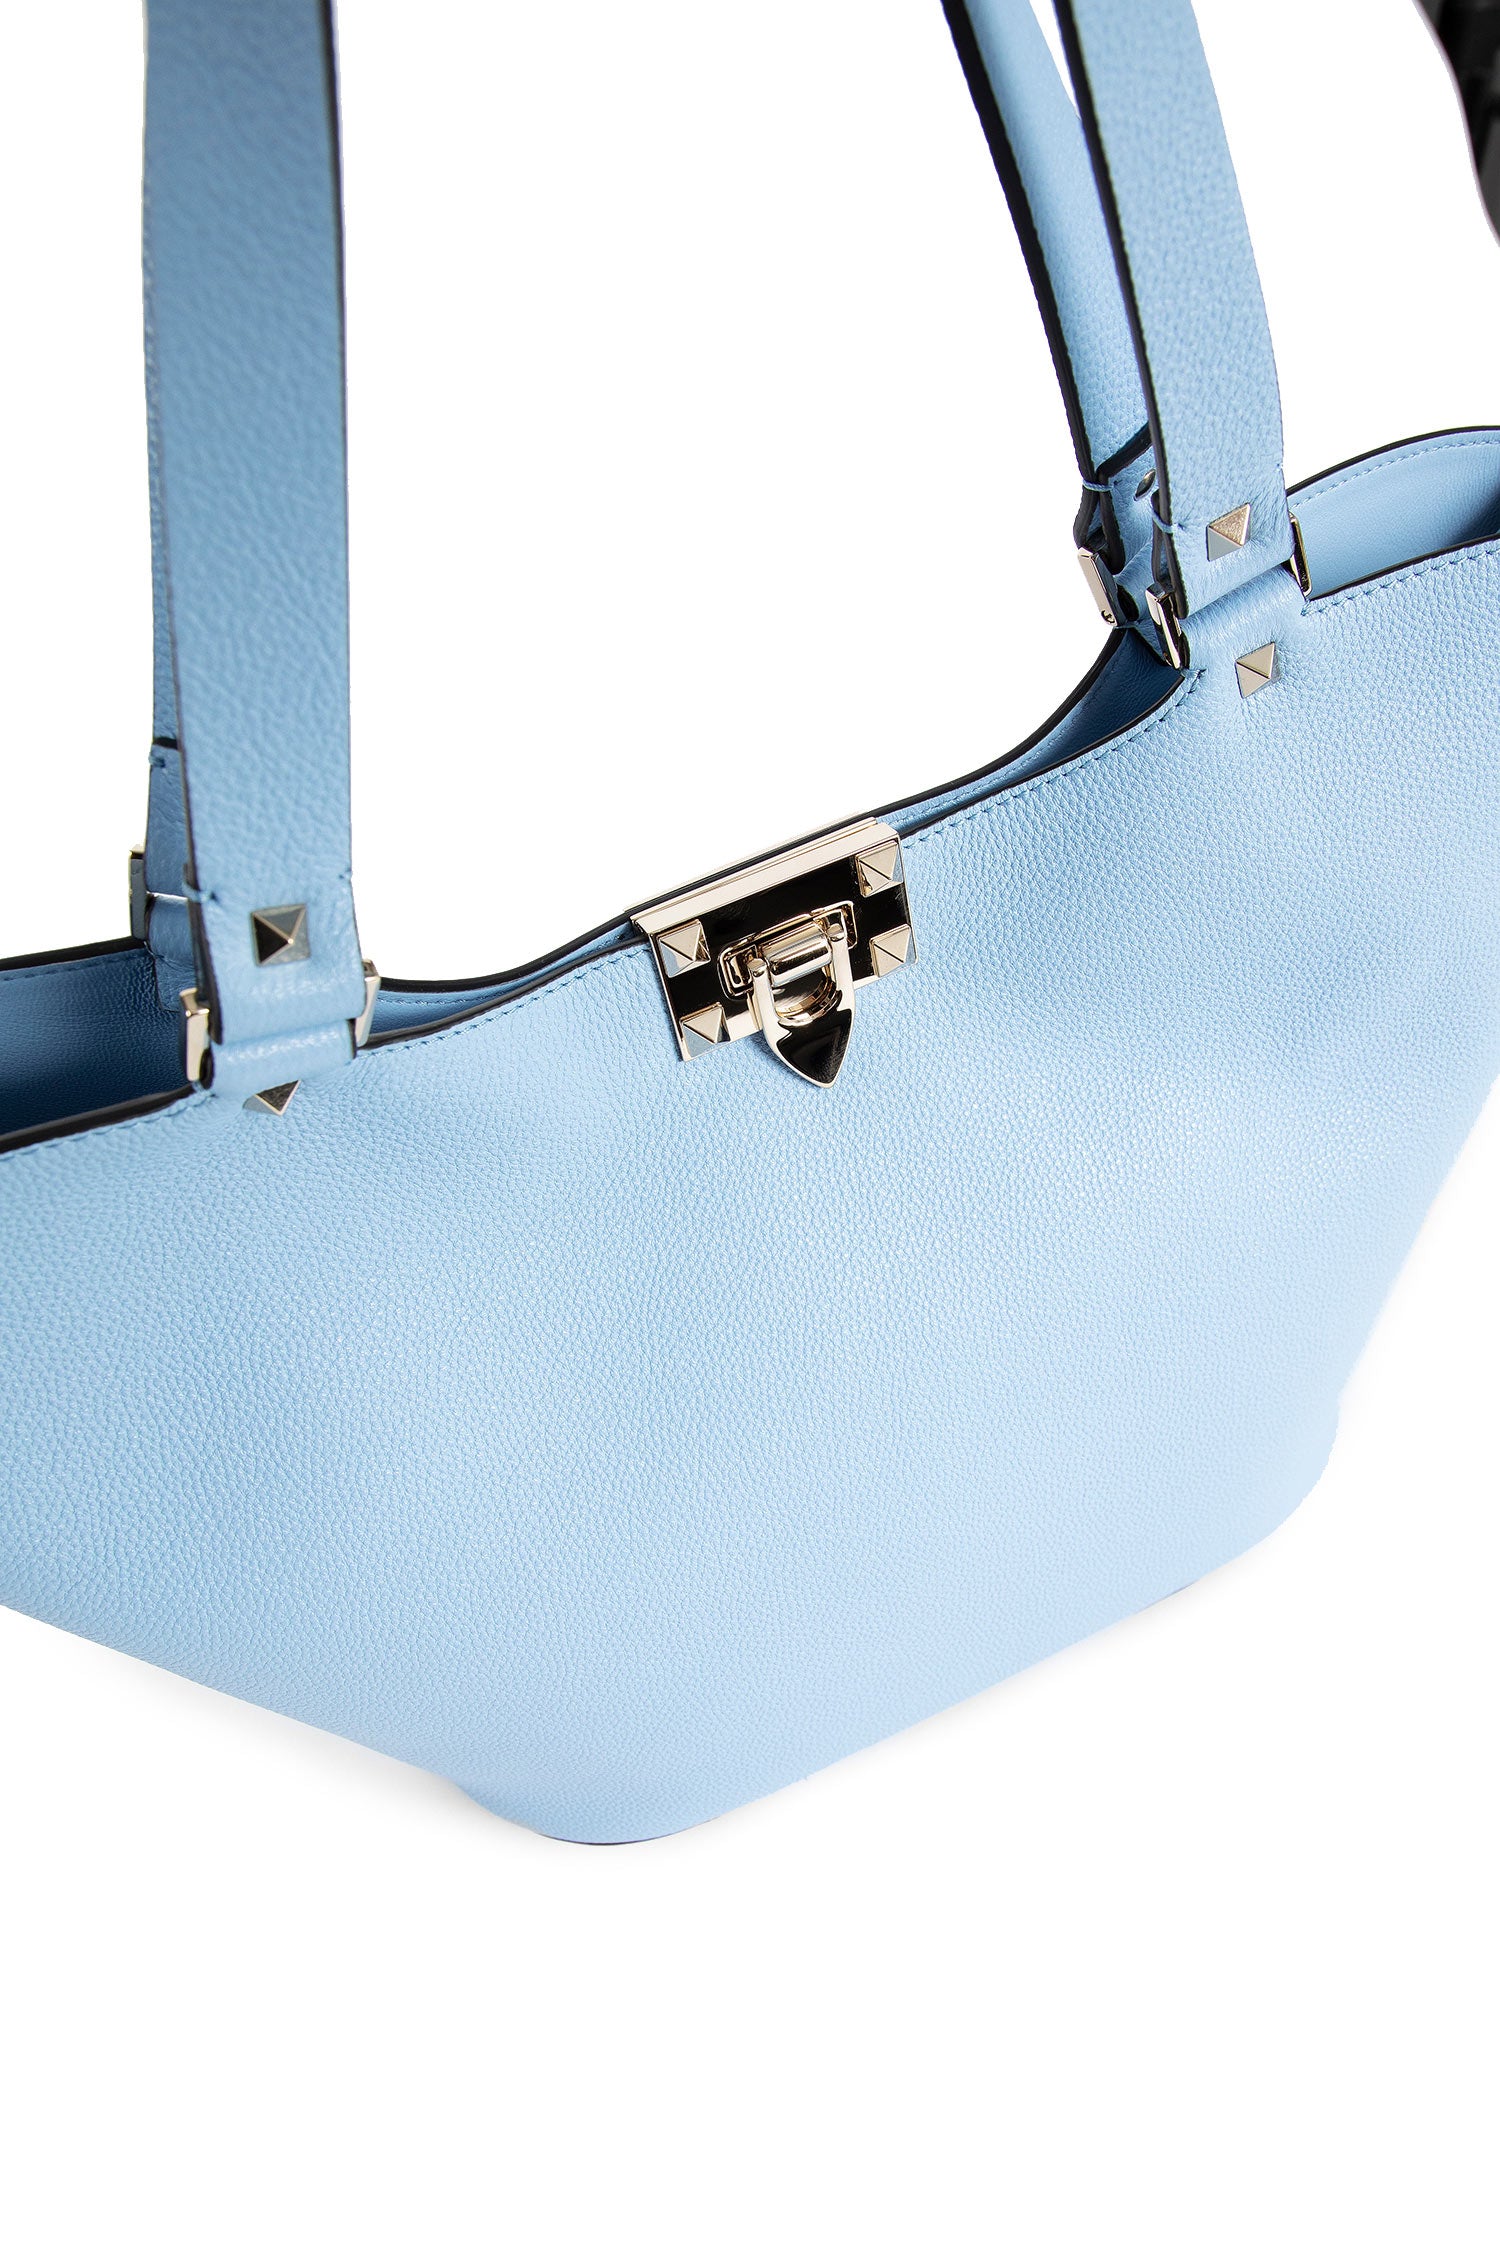 VALENTINO WOMAN BLUE TOTE BAGS